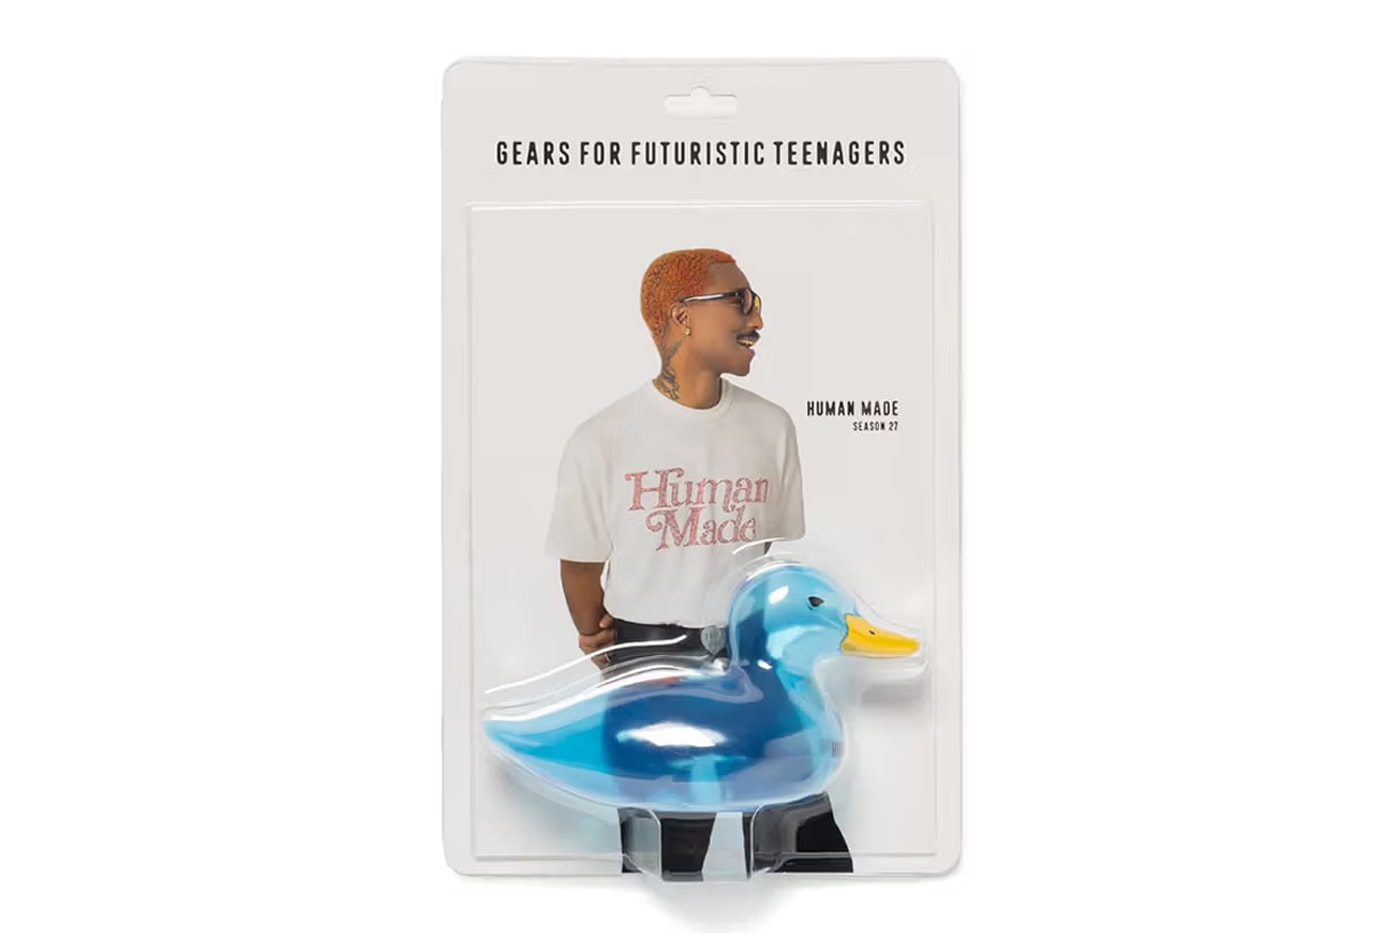 HUMAN MADE Prepares For Season 27 With 30-Page Lookbook verdy tee crystal jewel release link drop futuristic teen pharrell duck price 26 collab graphic